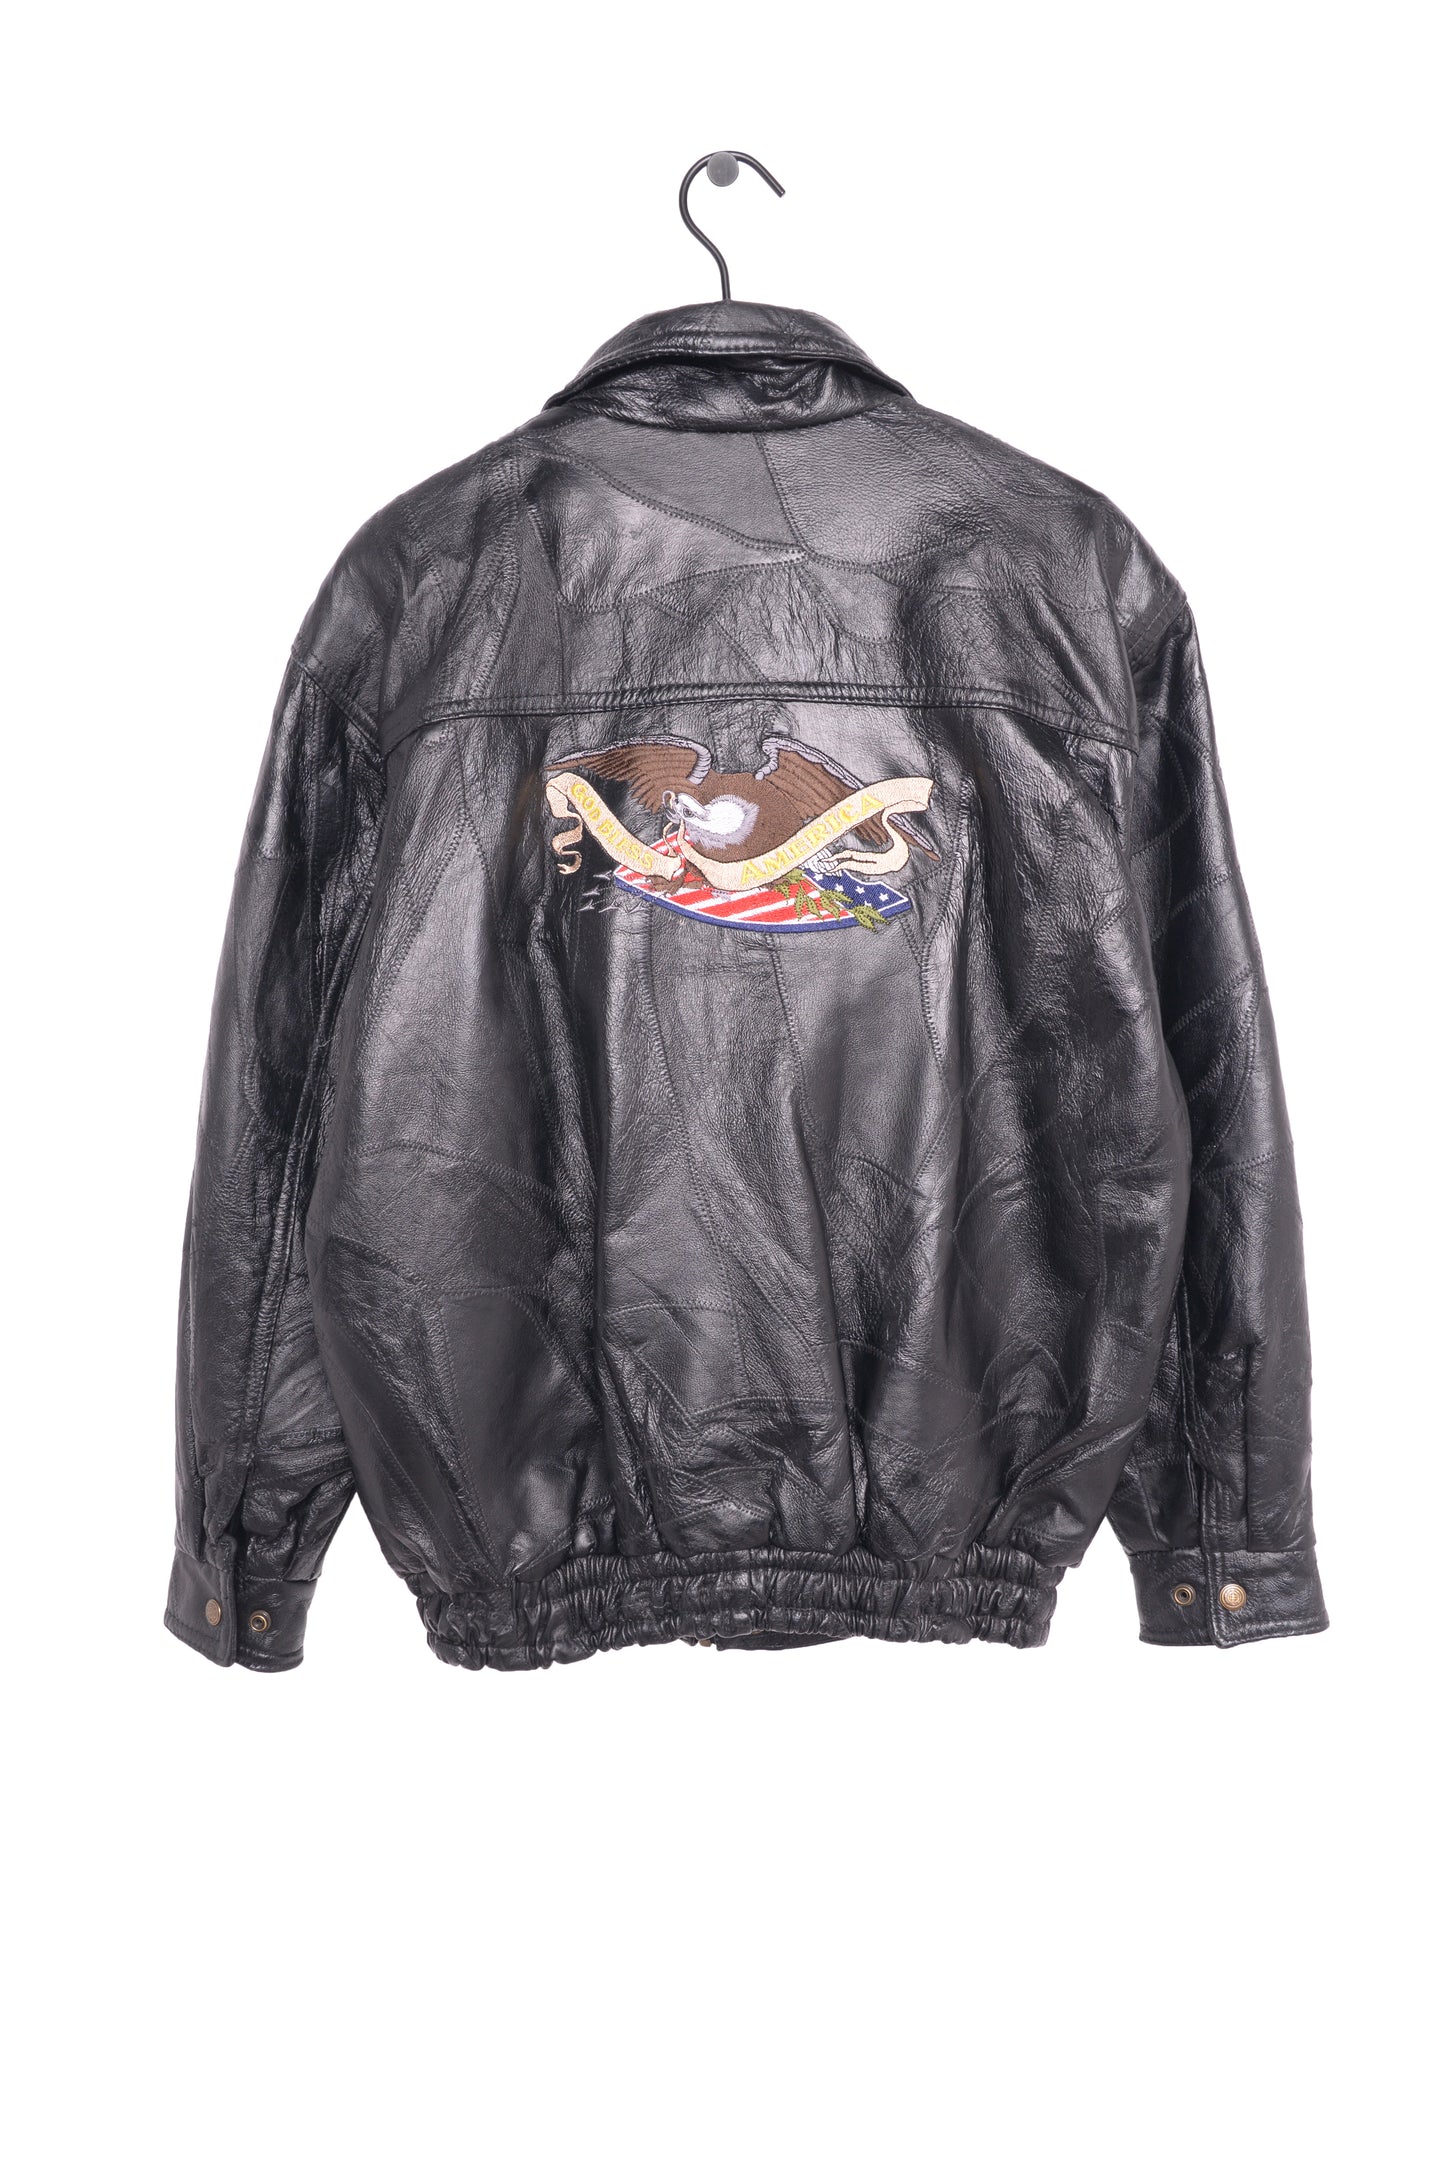 1980s Patchwork Leather Bomber